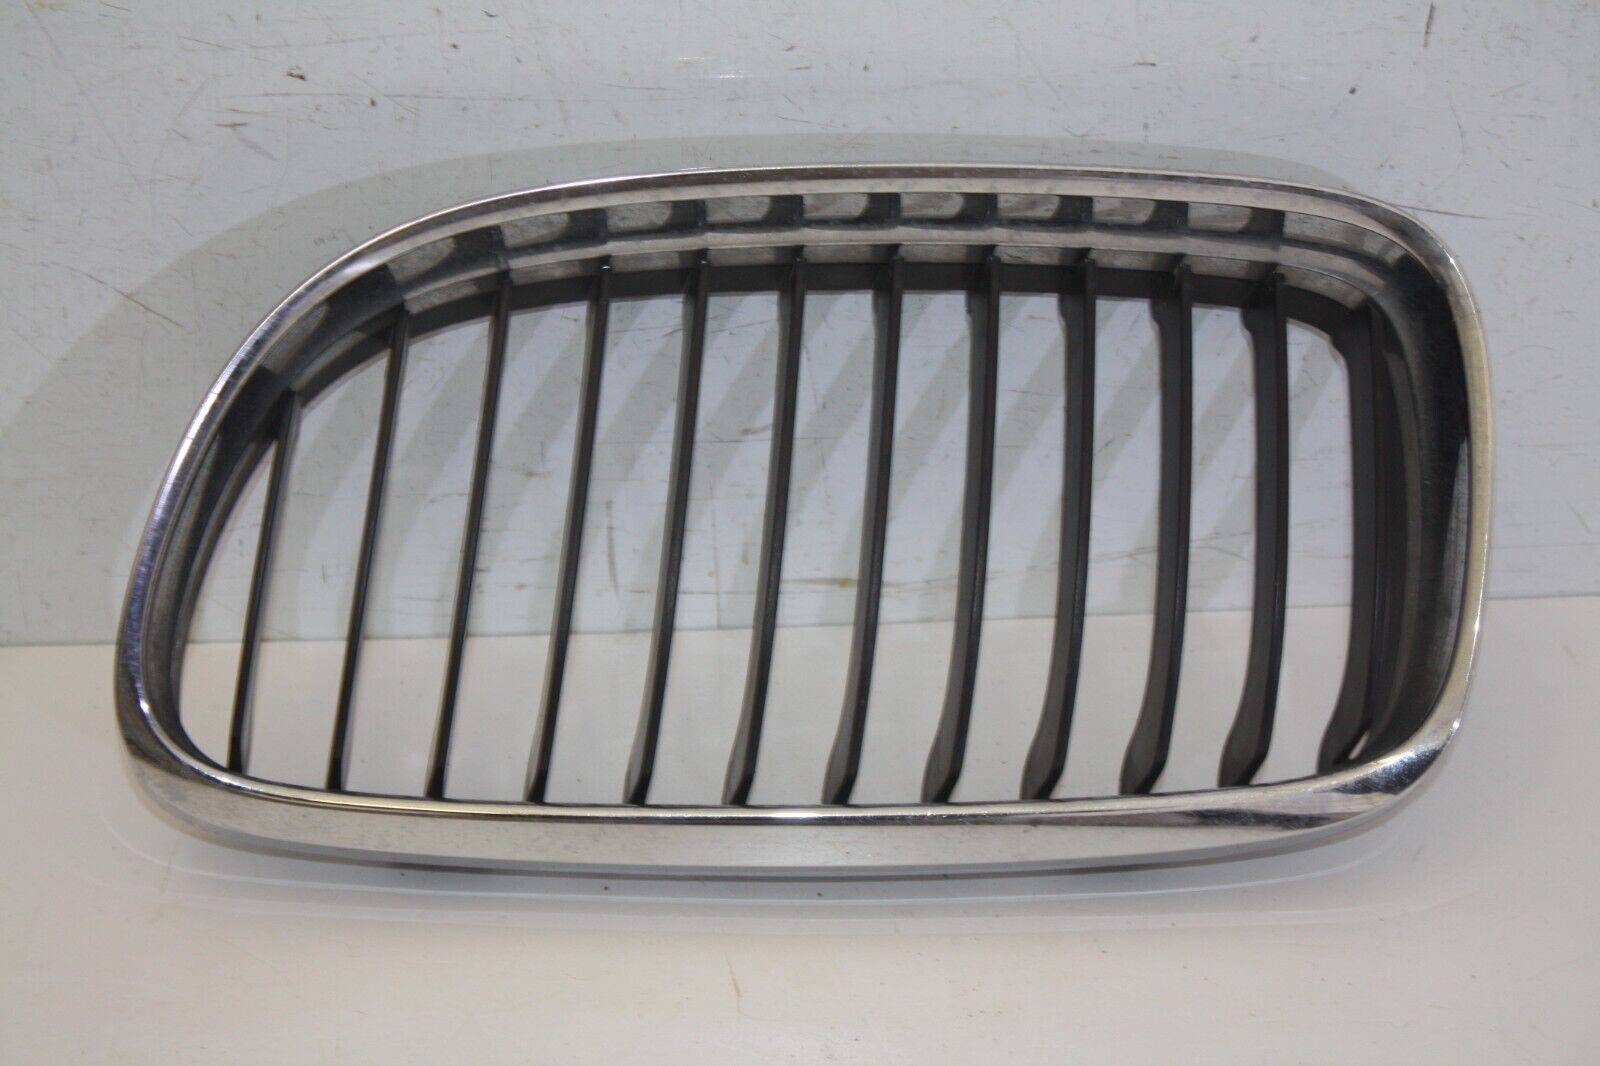 BMW 3 Series E90 LCI Front Bumper Left Kidney Grill 2008 TO 2012 51137201967 176234542894